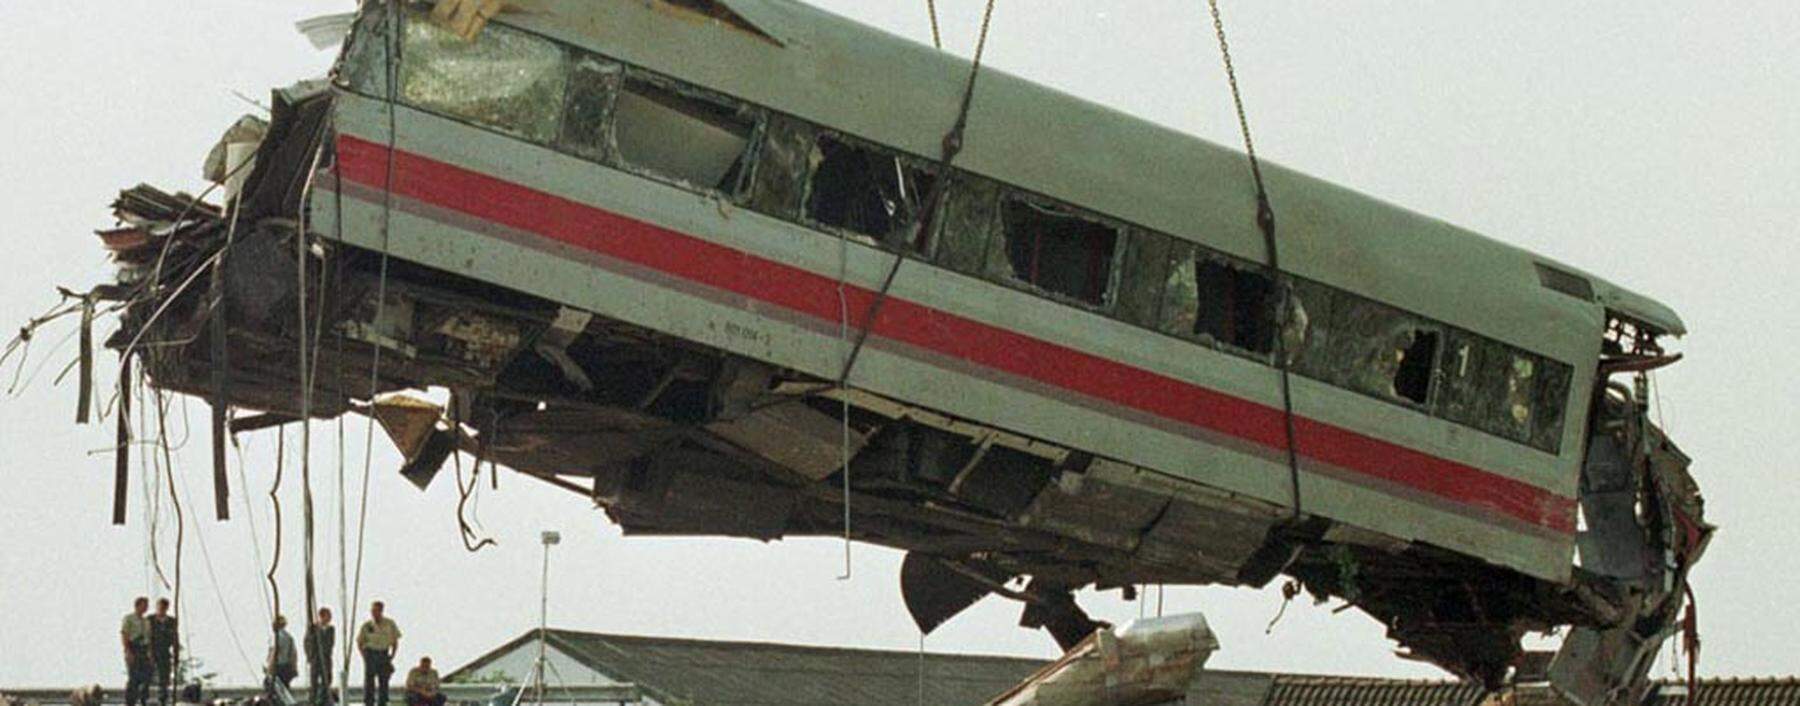 A CARRIAGE OF THE WRECKED TRAIN IS LIFTED BY A CRANE IN ESCHEDE.